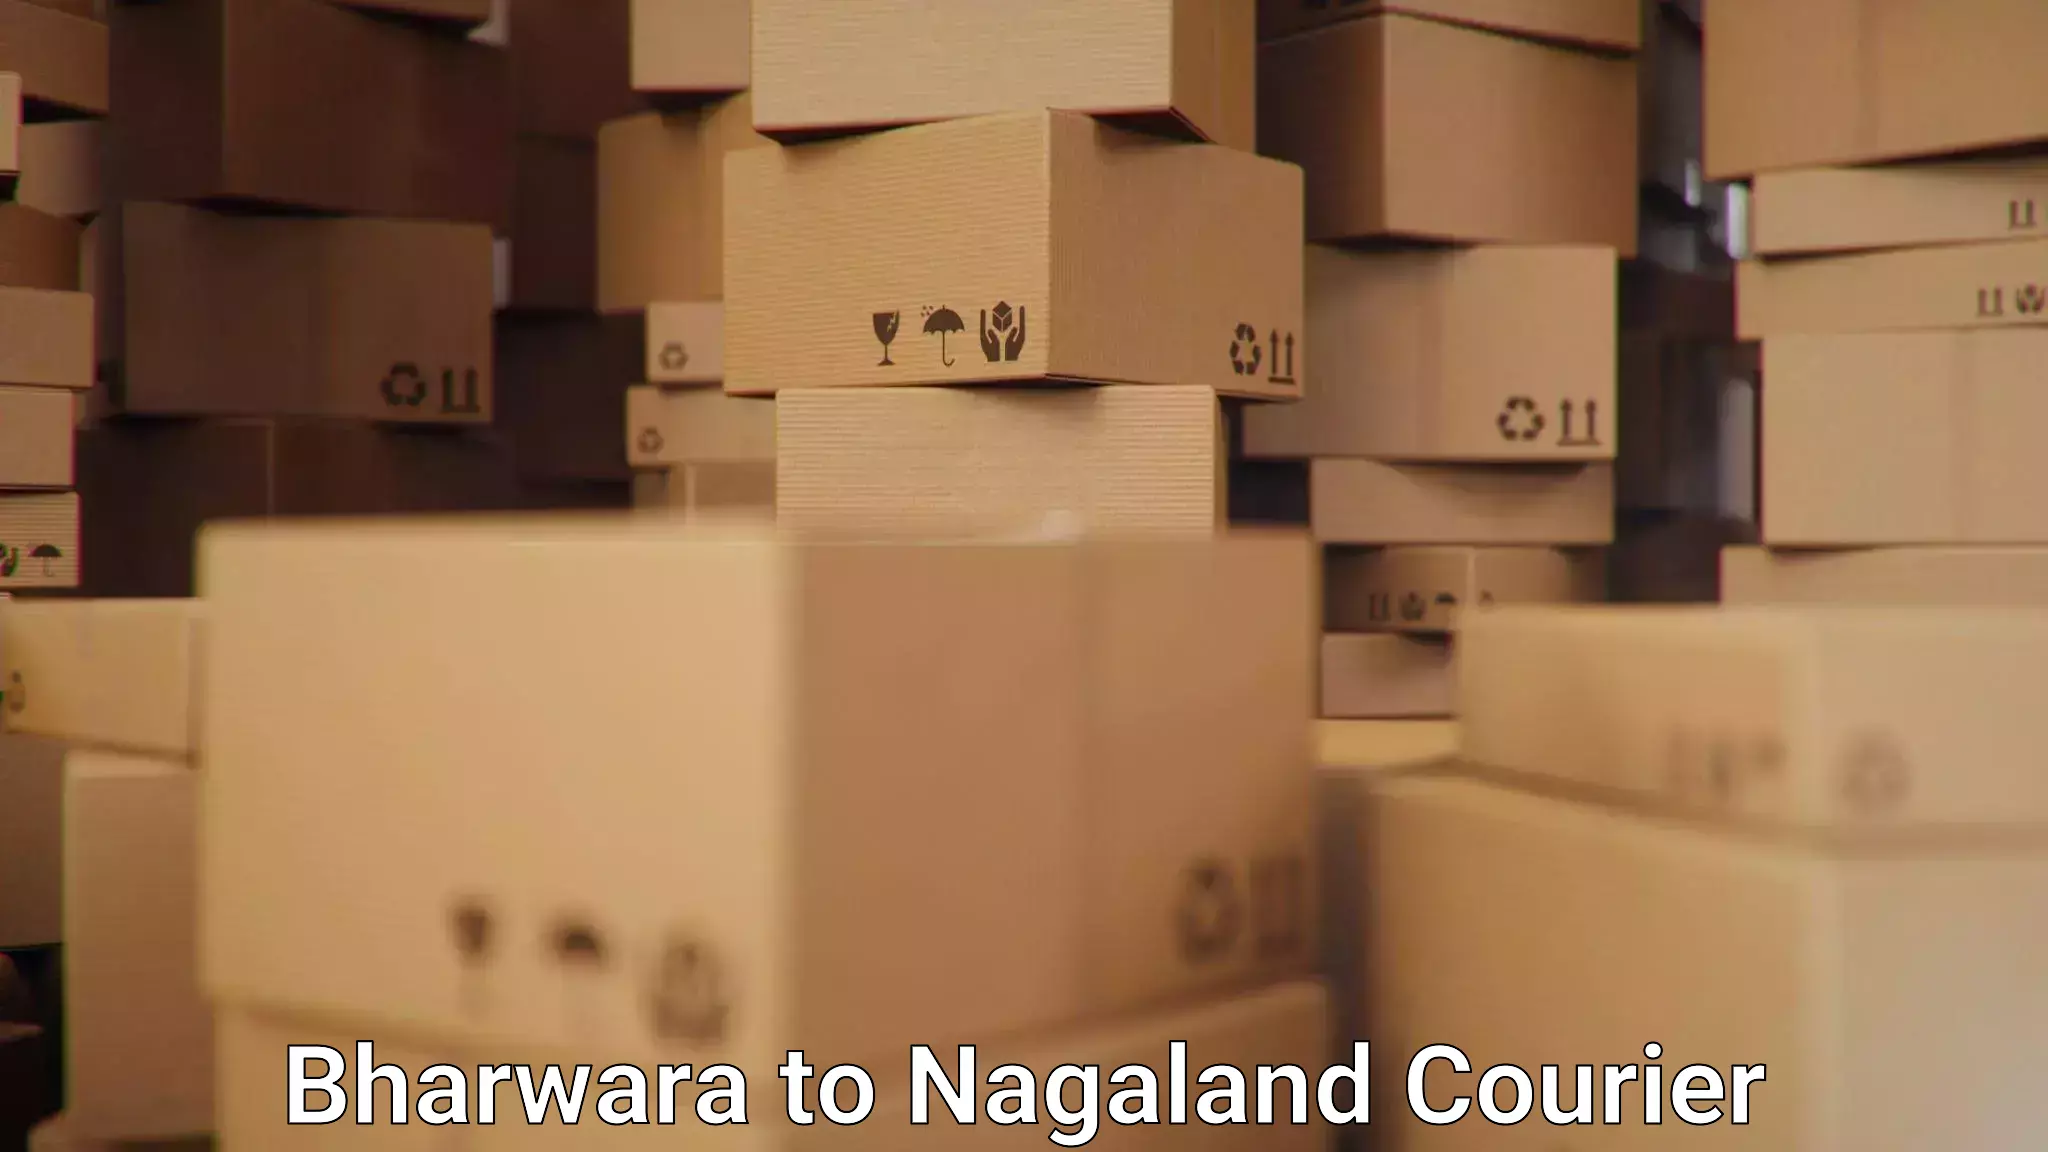 Flexible delivery schedules Bharwara to NIT Nagaland